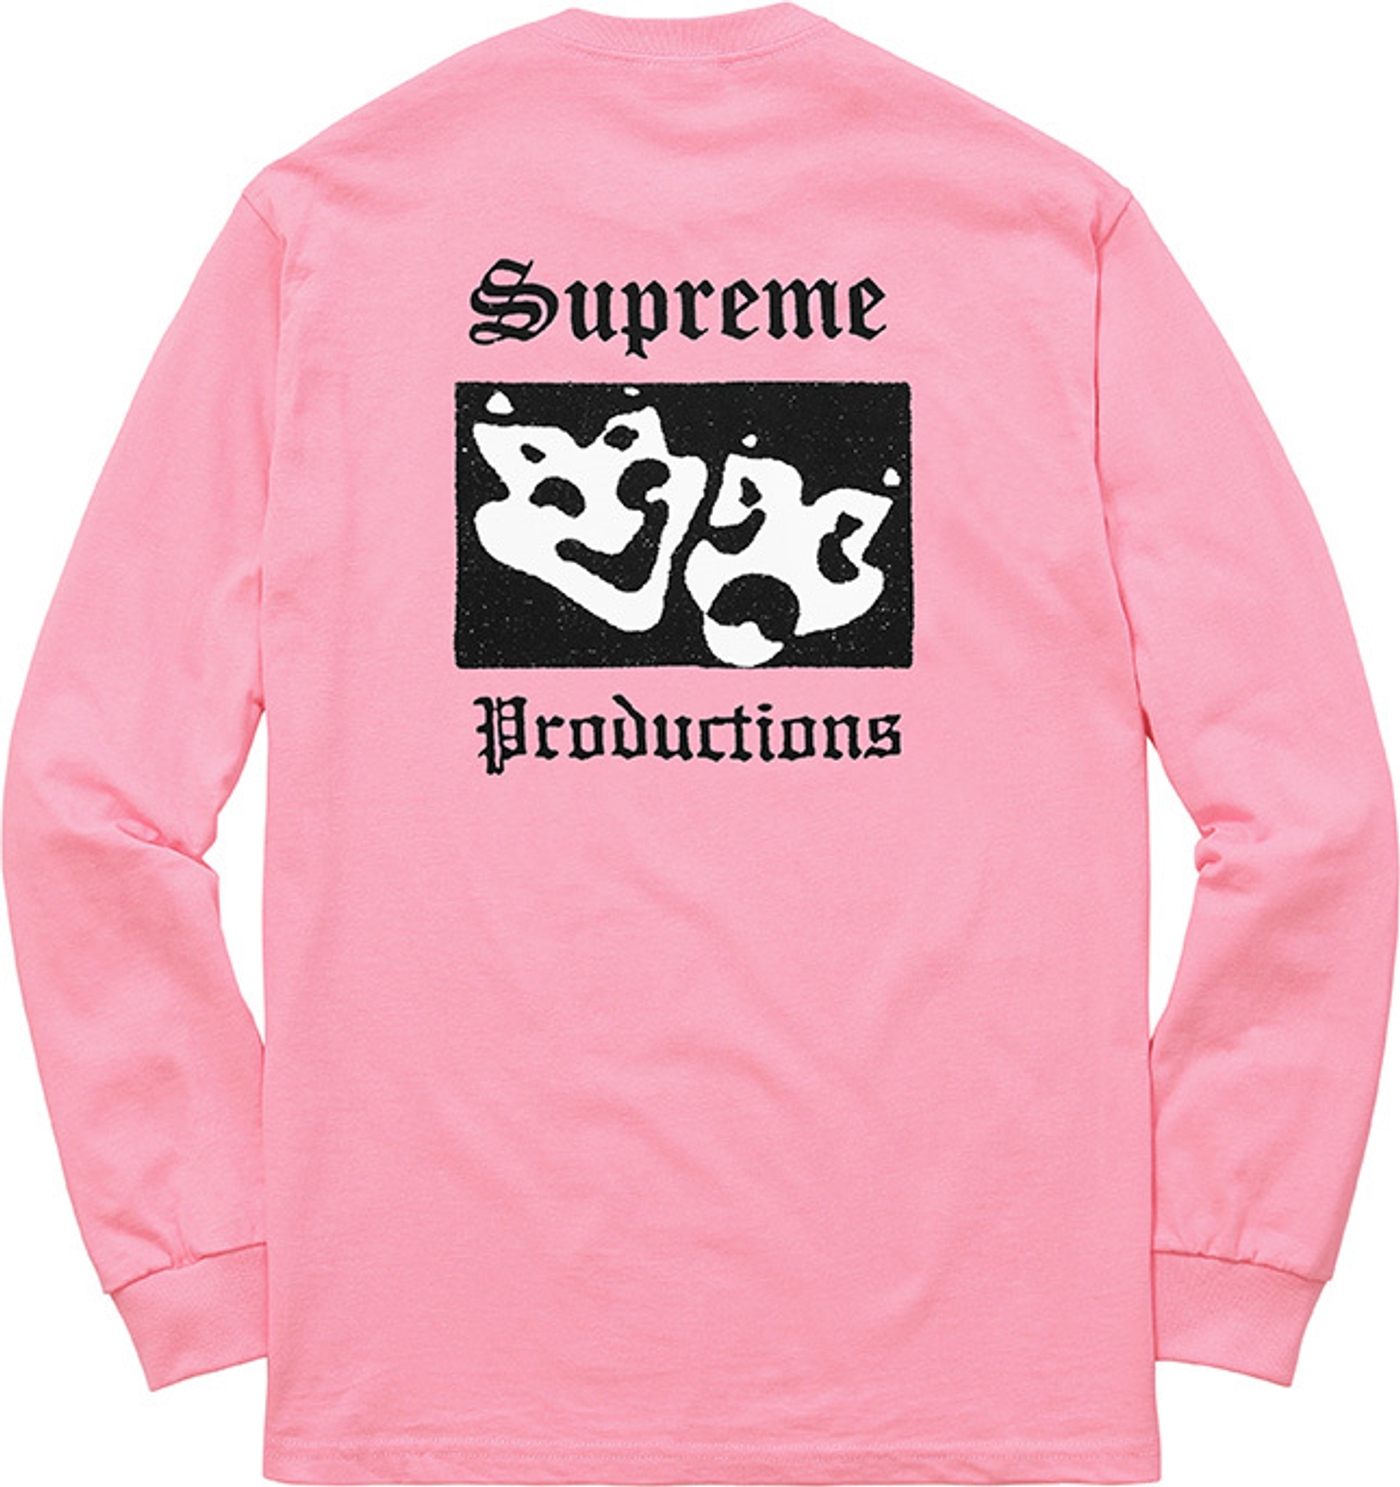 Productions L/S Tee (5/9)